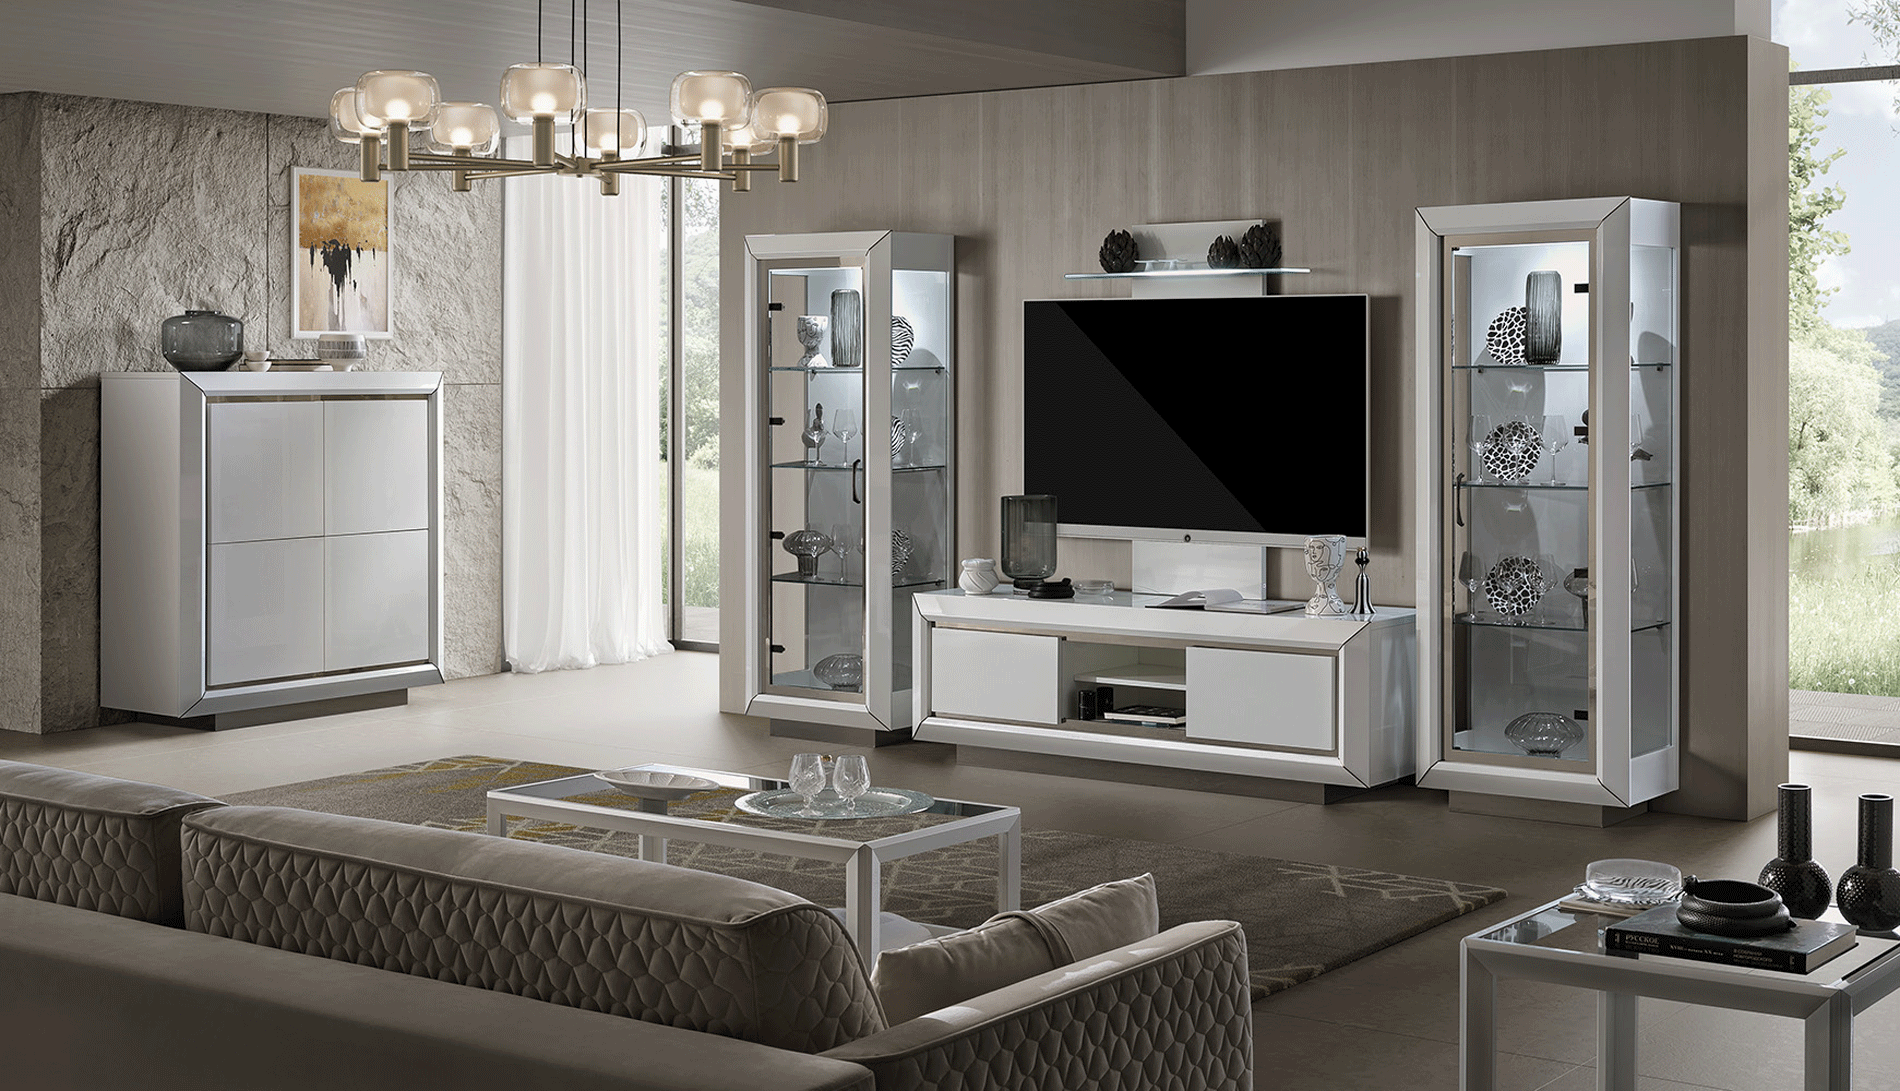 Dining Room Furniture Classic Dining Room Sets Elite WHITE Entertainment center Additional items